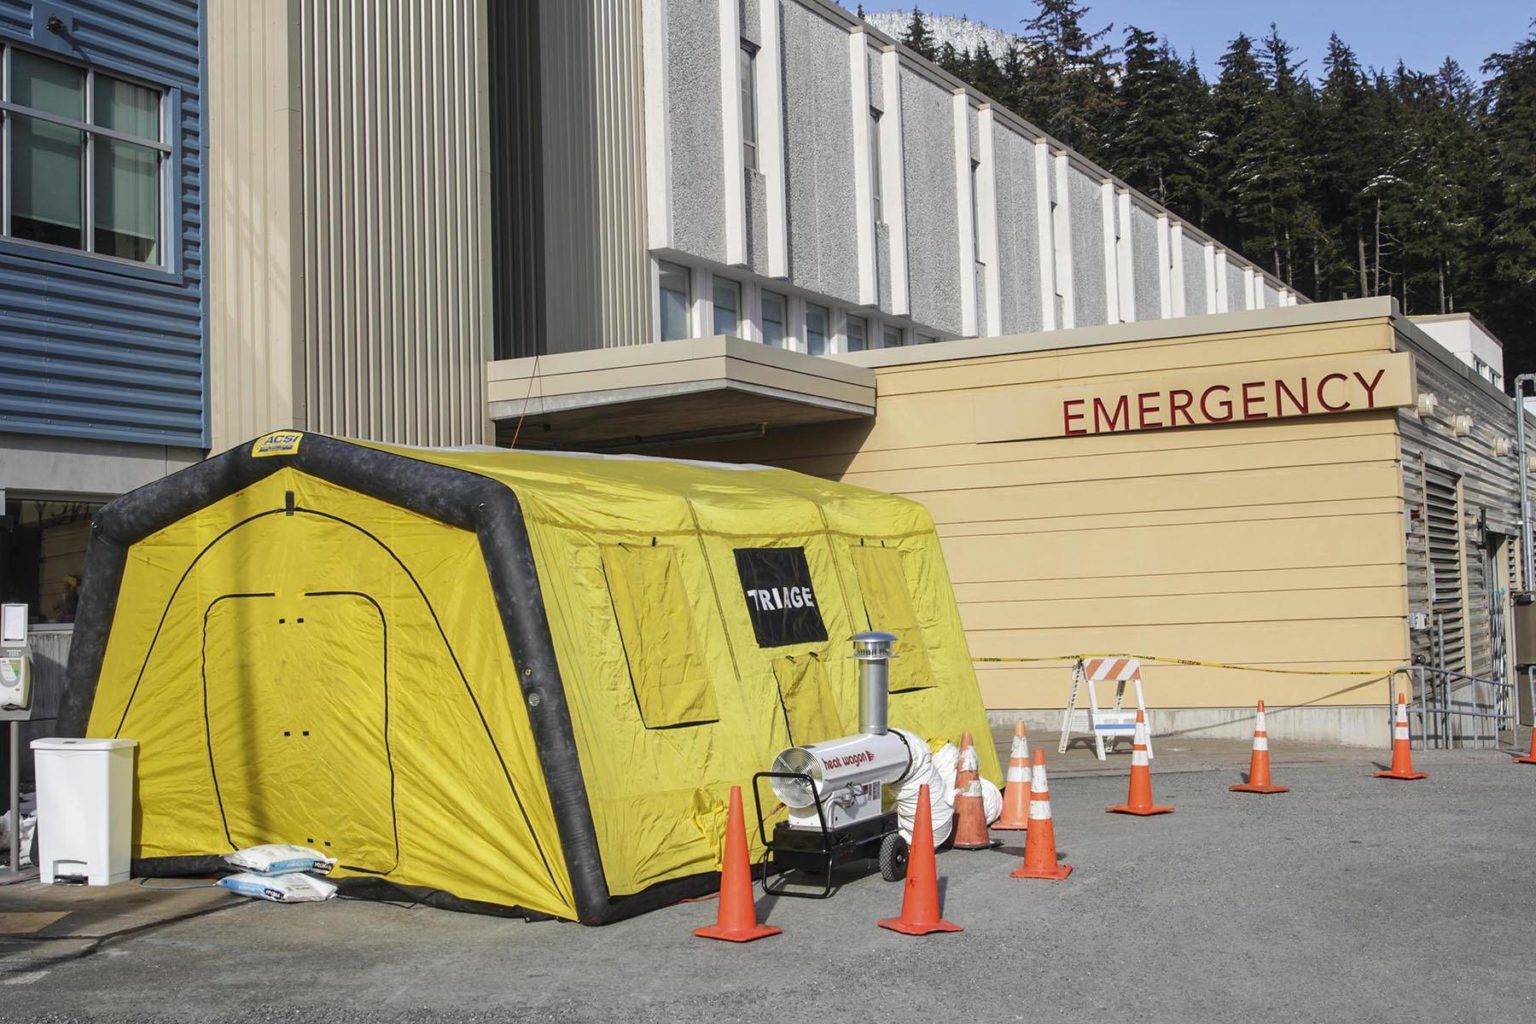 This temporary shelter was set up earlier this year outside Bartlett Regional Hospital for the staff screening people entering the hospital. (Michael Lockett / Juneau Empire File)